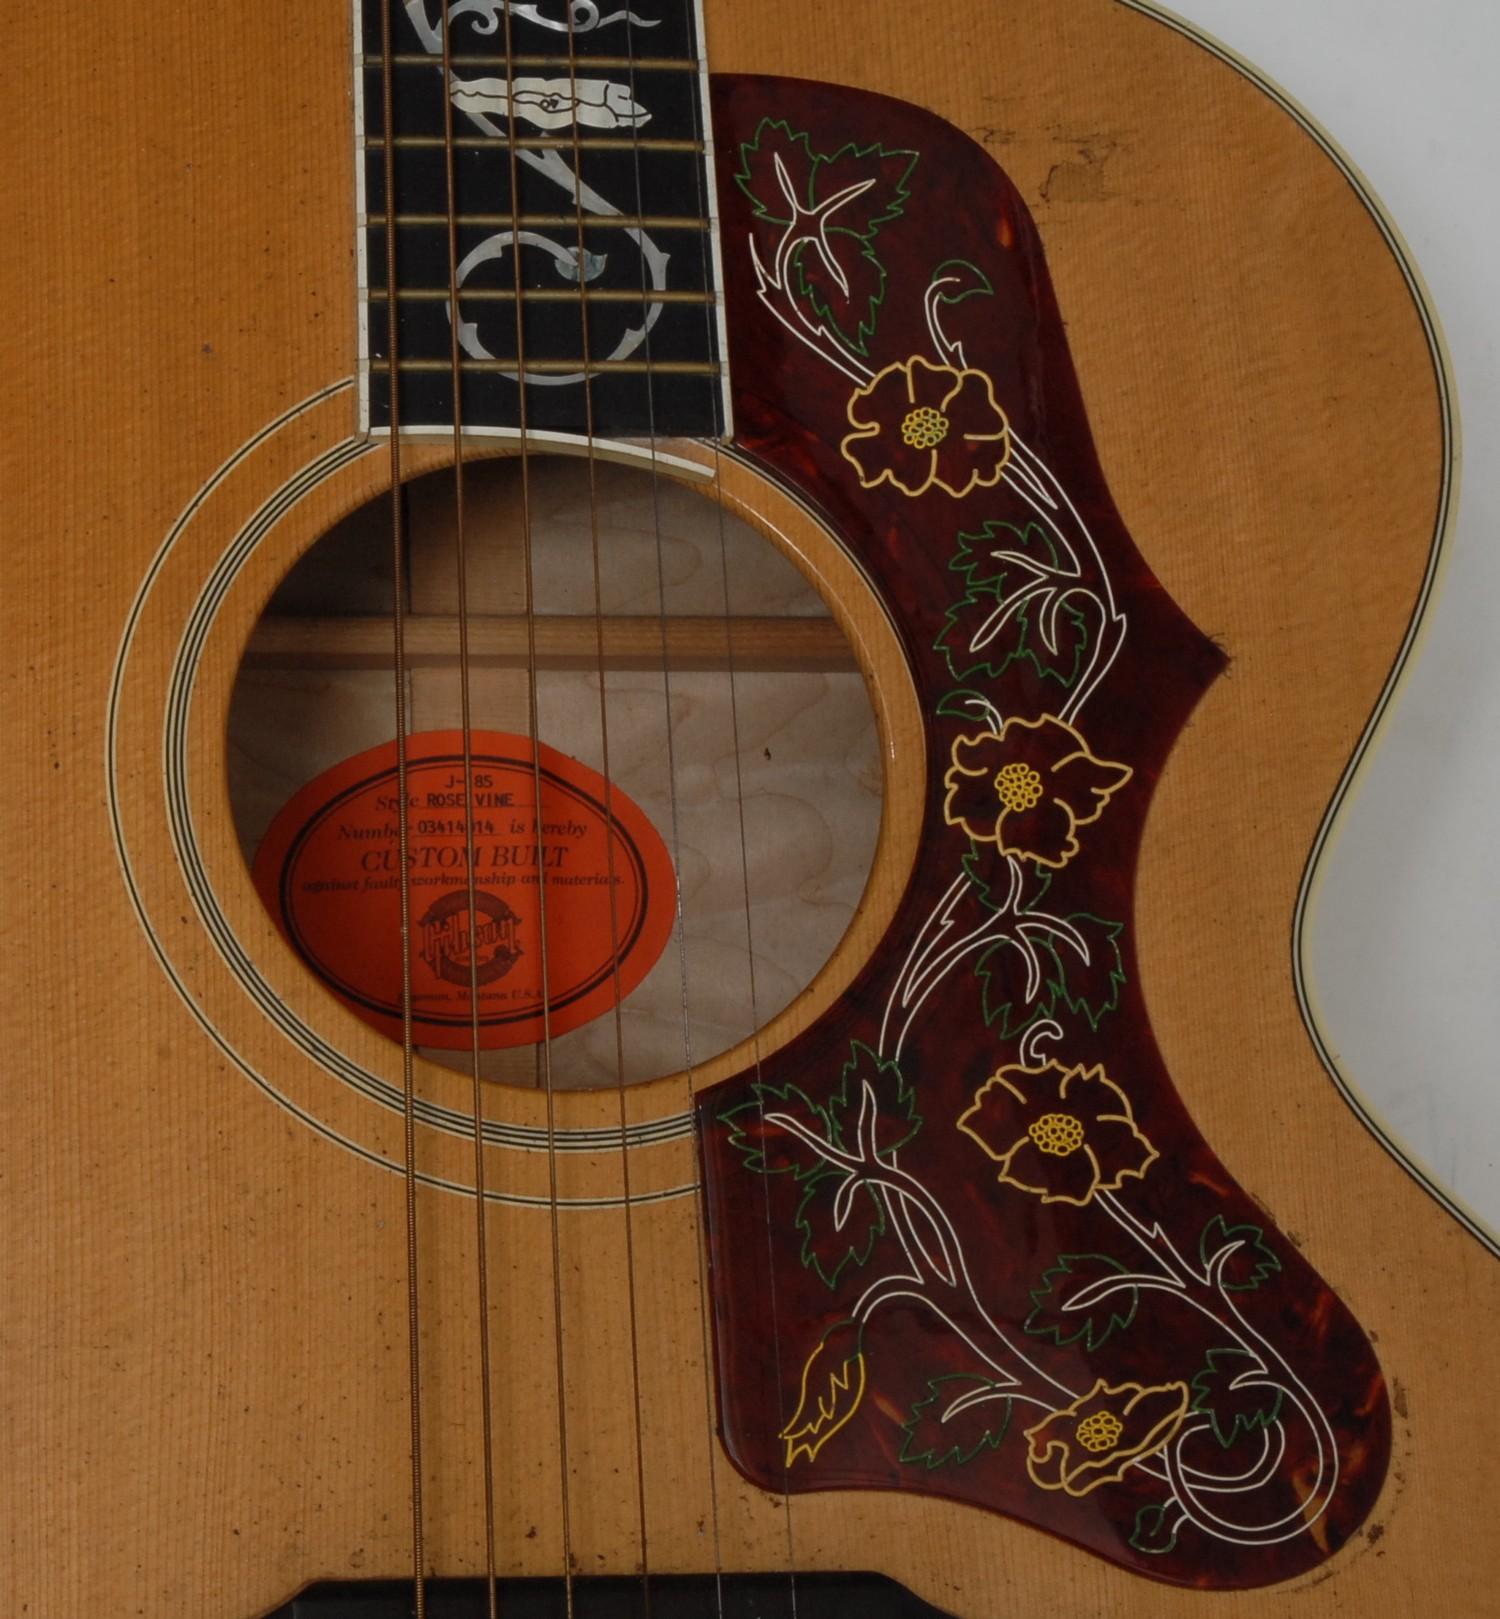 A Gibson J-185 Rose Vine Acoustic guitar, Bozeman, Montana USA, figured maple body back and sides, - Image 15 of 18